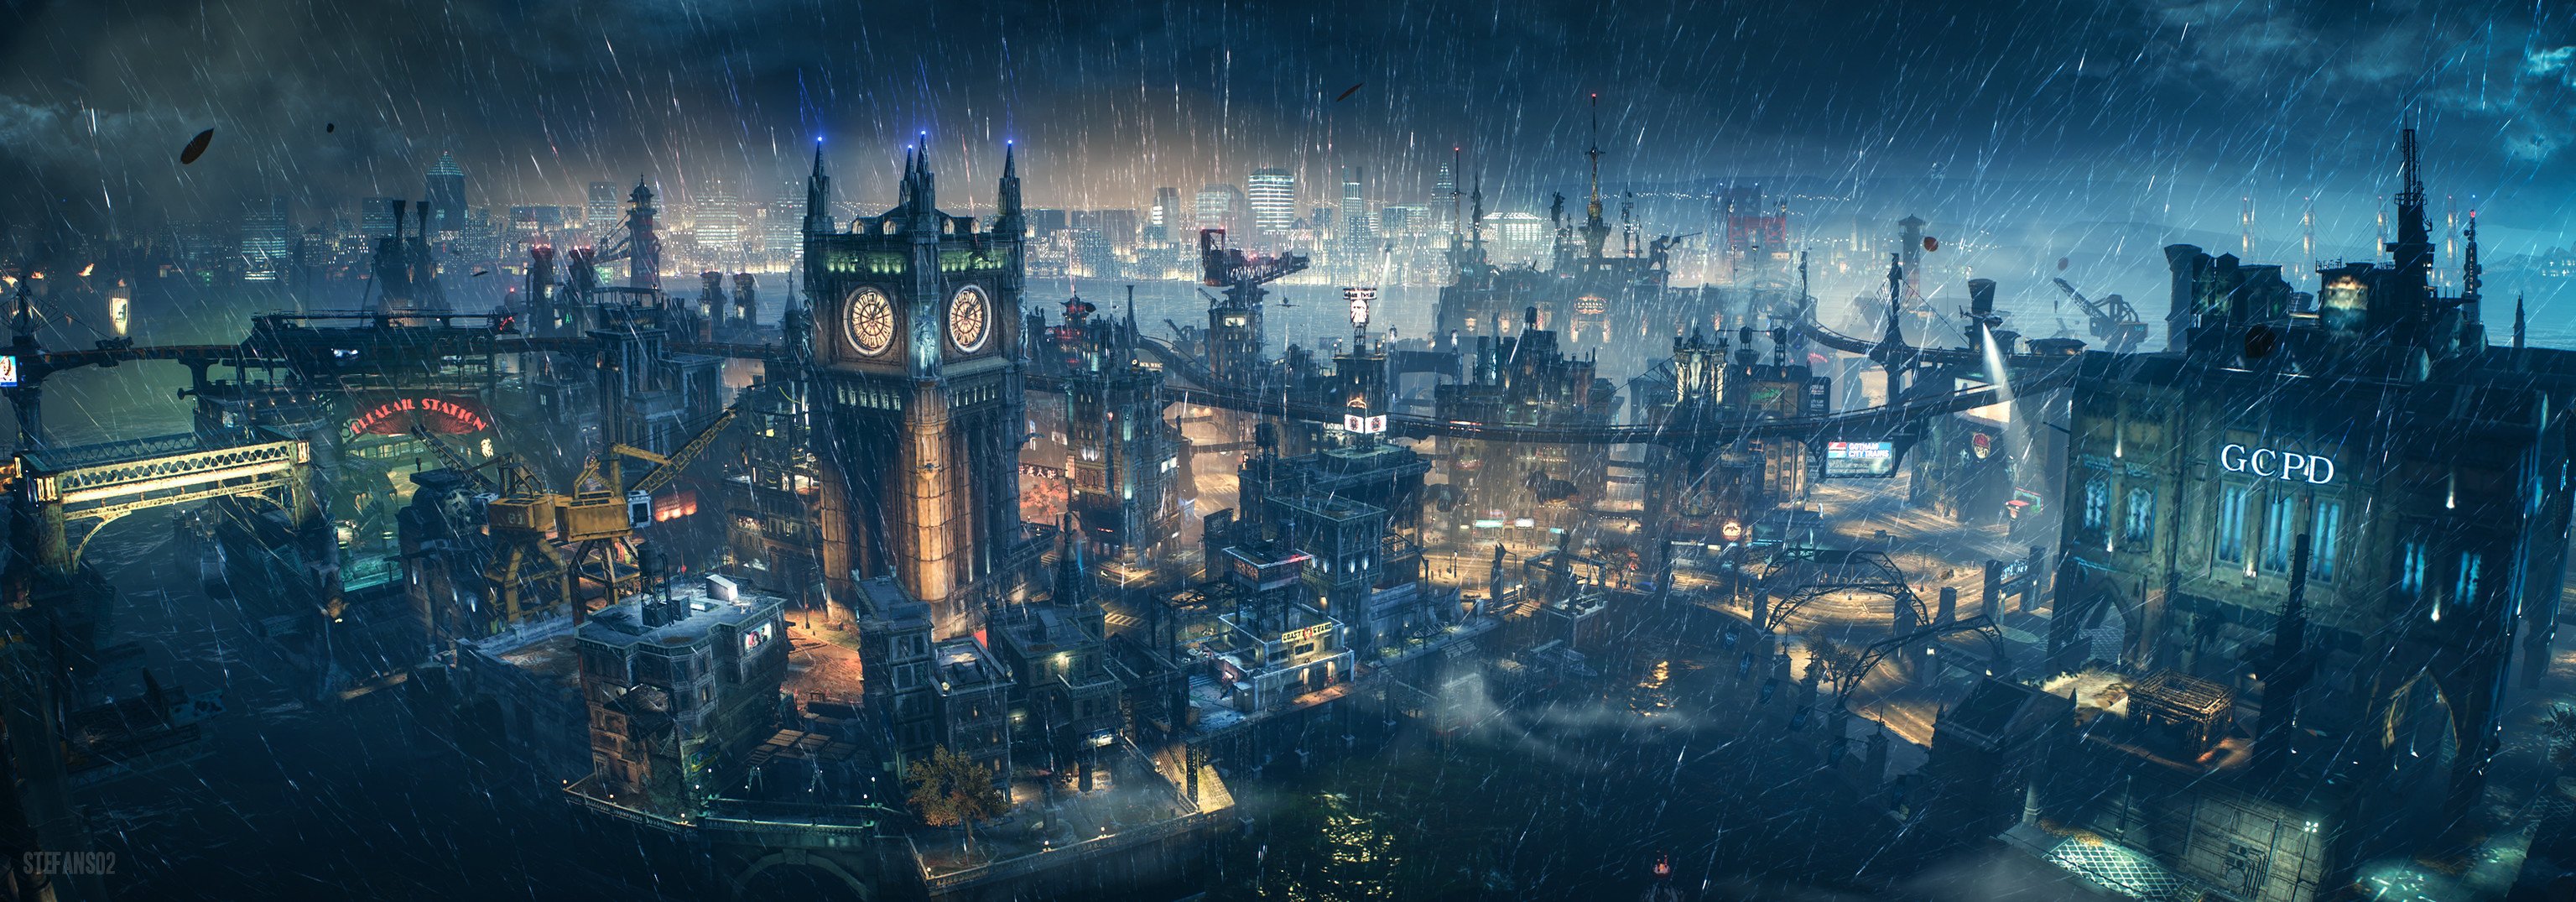 Video Games Cityscapes on Twitter: 